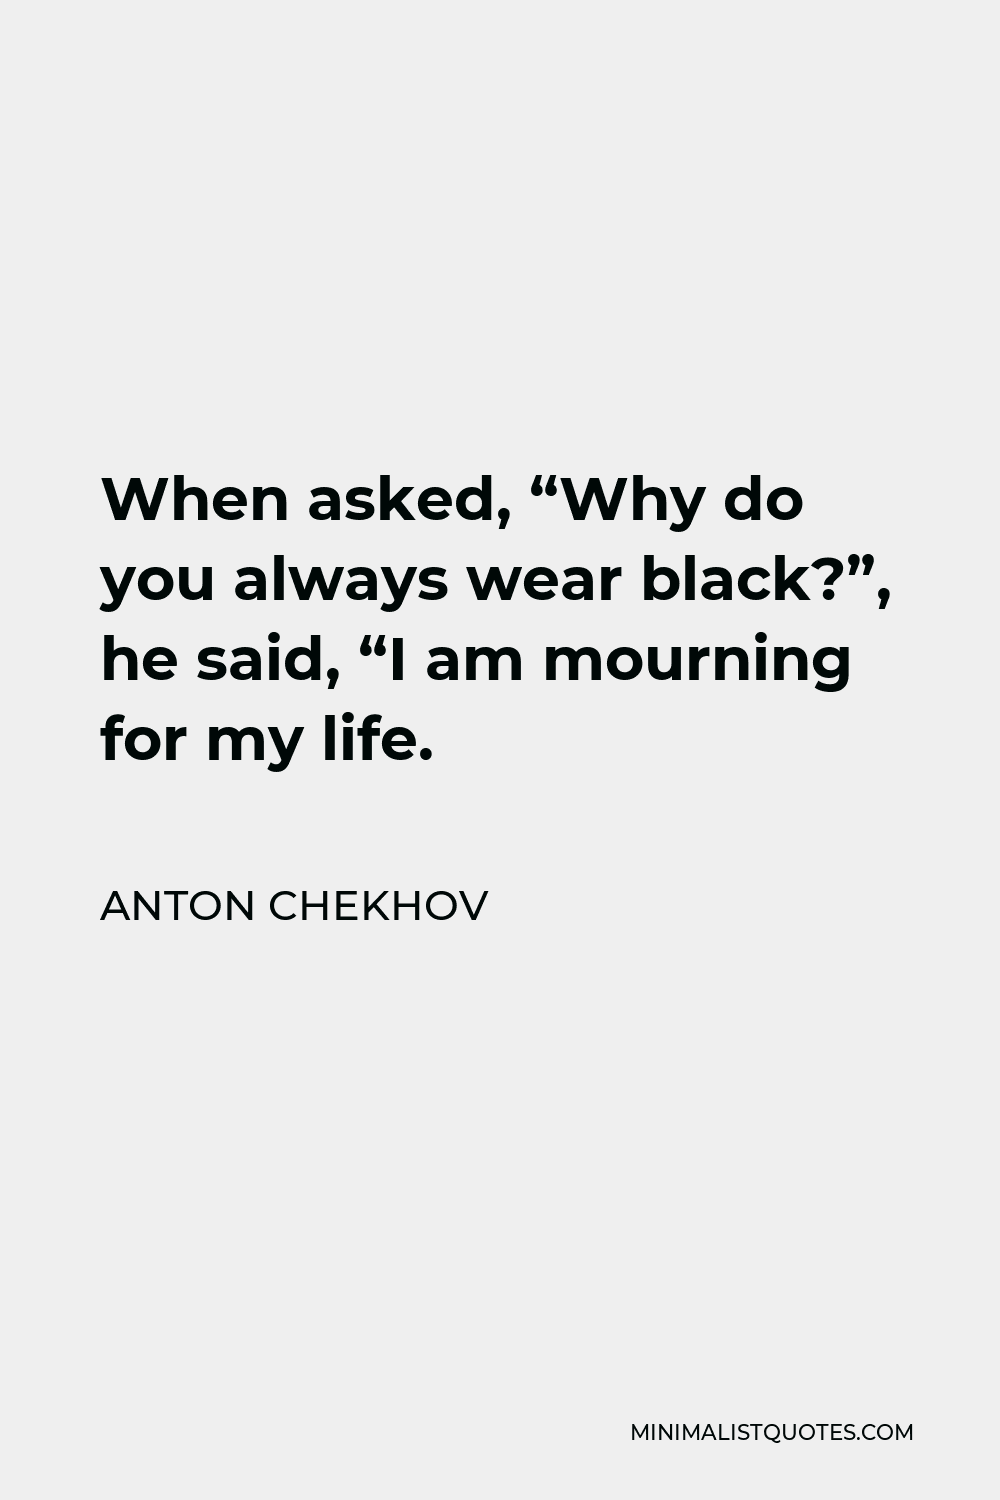 Anton Chekhov Quote - When asked, “Why do you always wear black?”, he said, “I am mourning for my life.